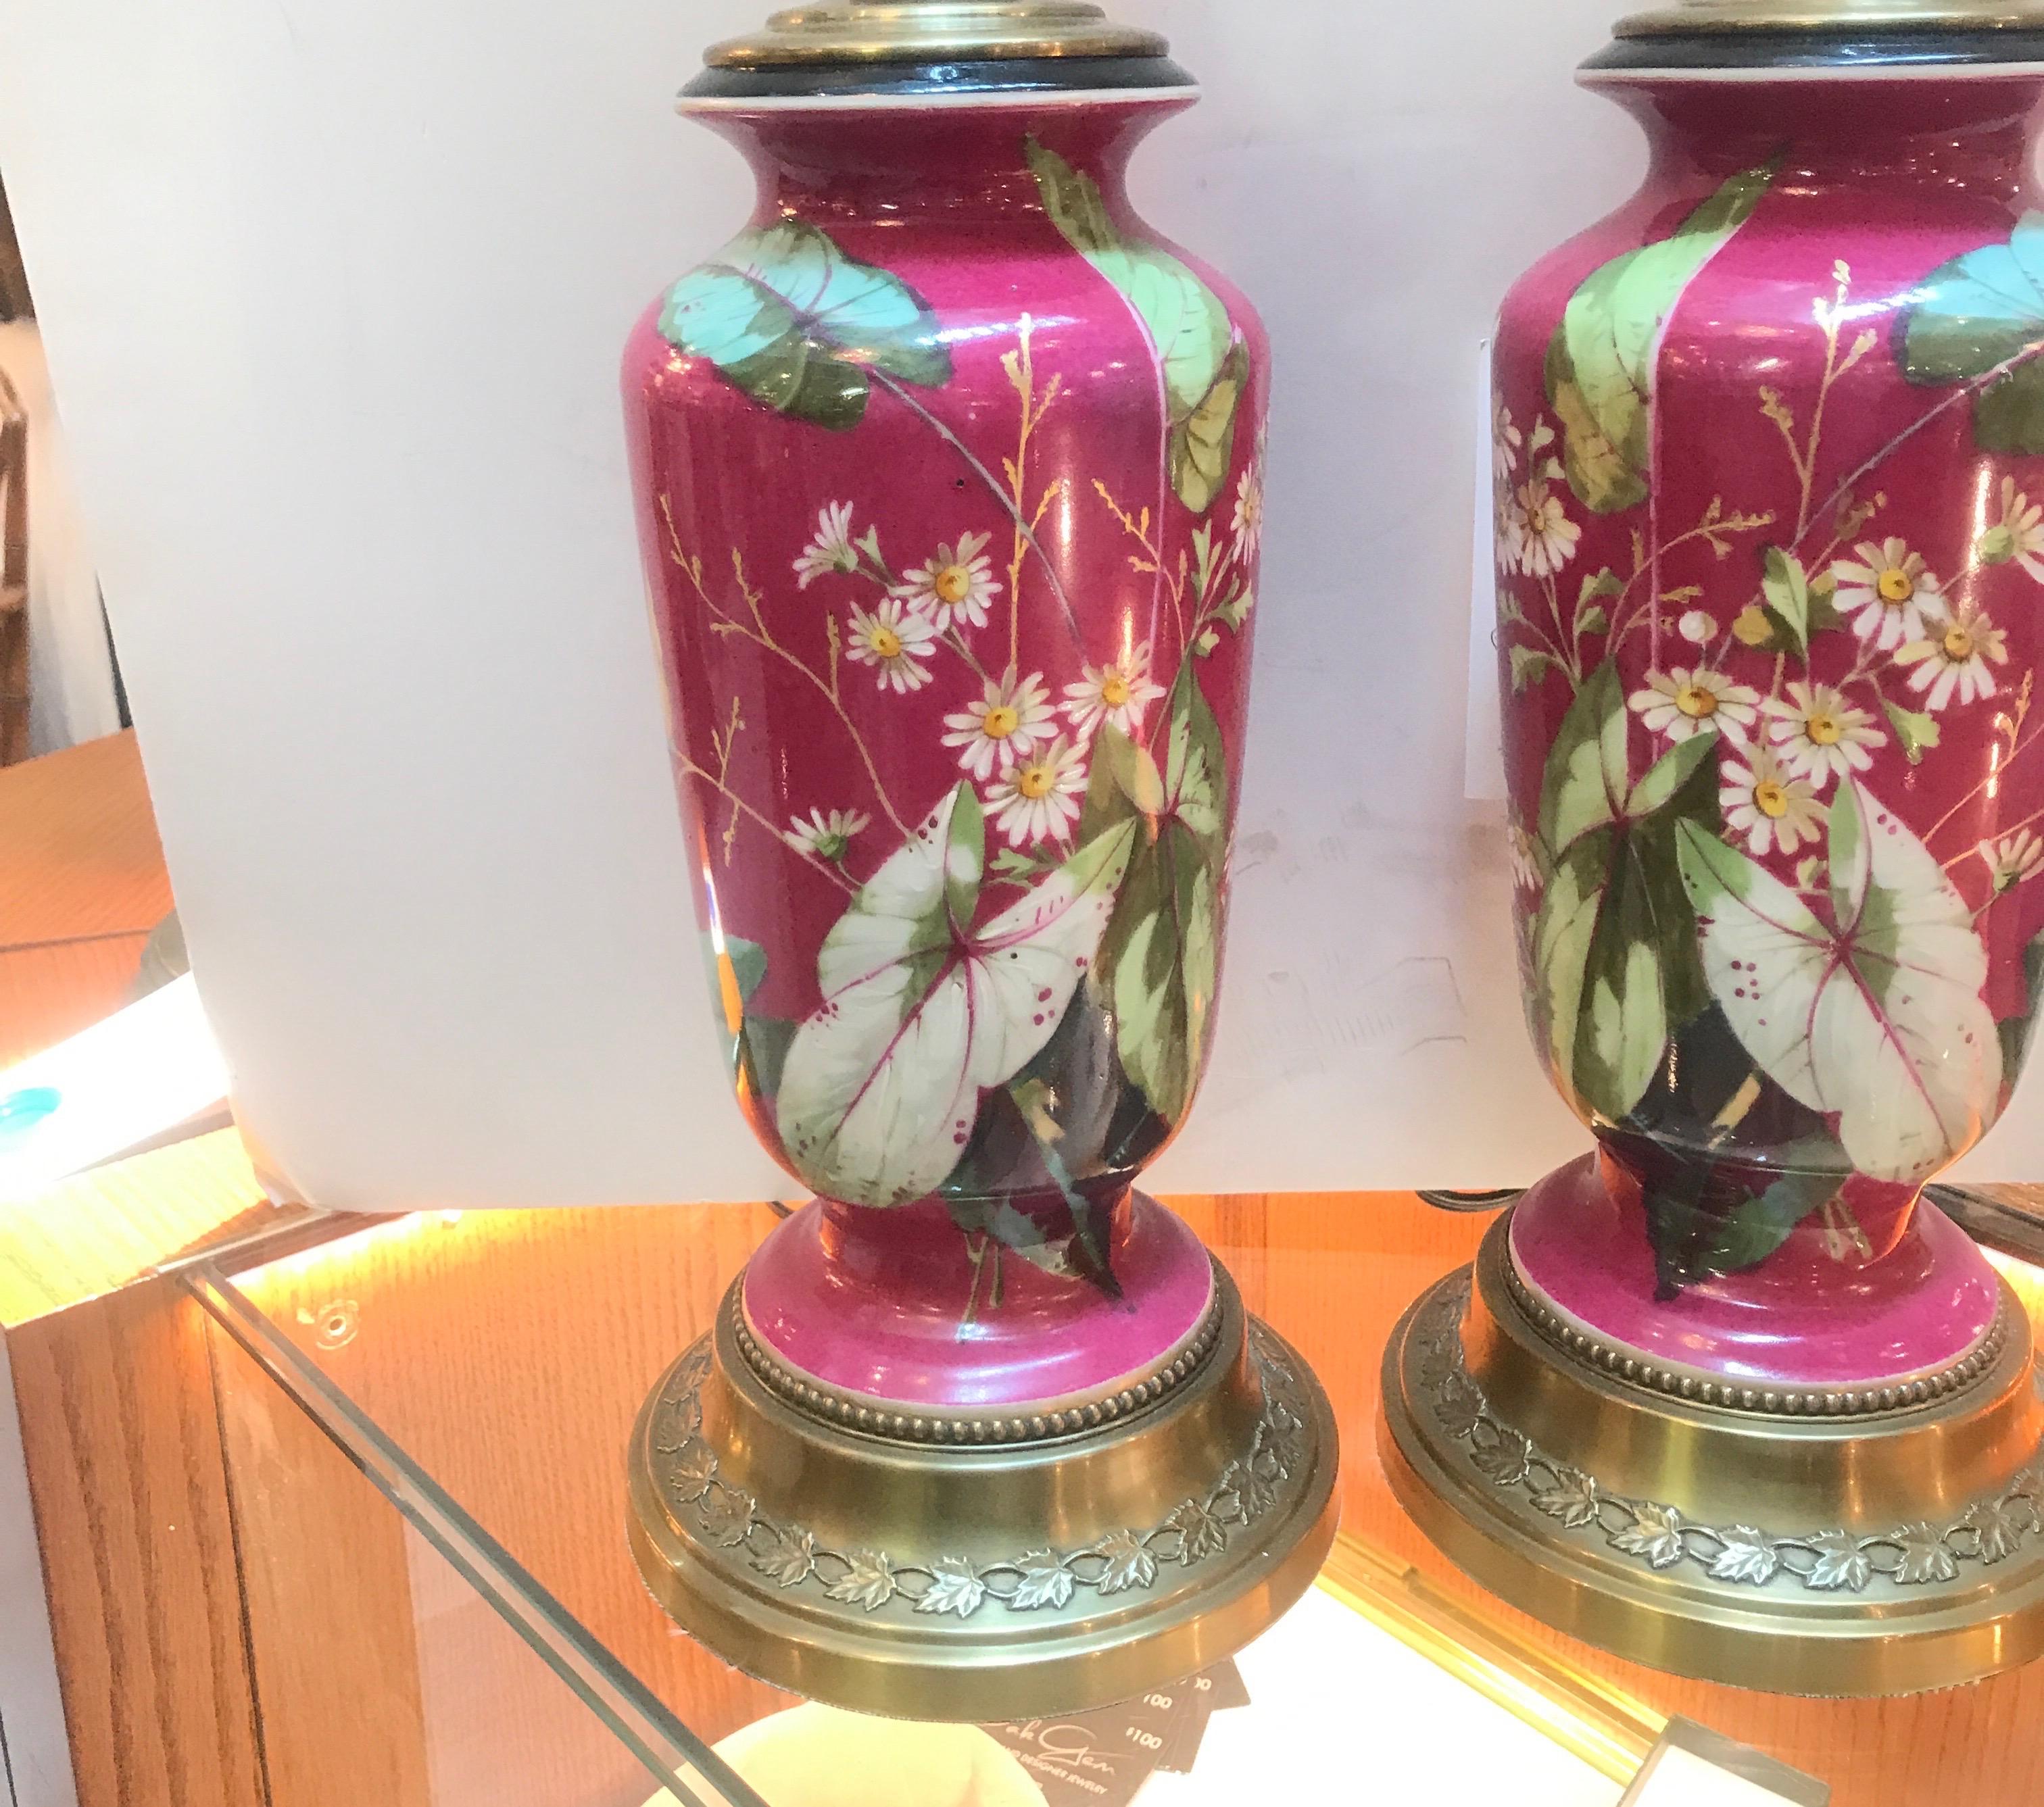 Exquisite pair of mid-19th century hand painted English porcelain vases now as lamps. The vibrant fuchsia vases with floral and leaf decoration and a true original pair being a mirror image of each other. The top with a jade sphere finial. The